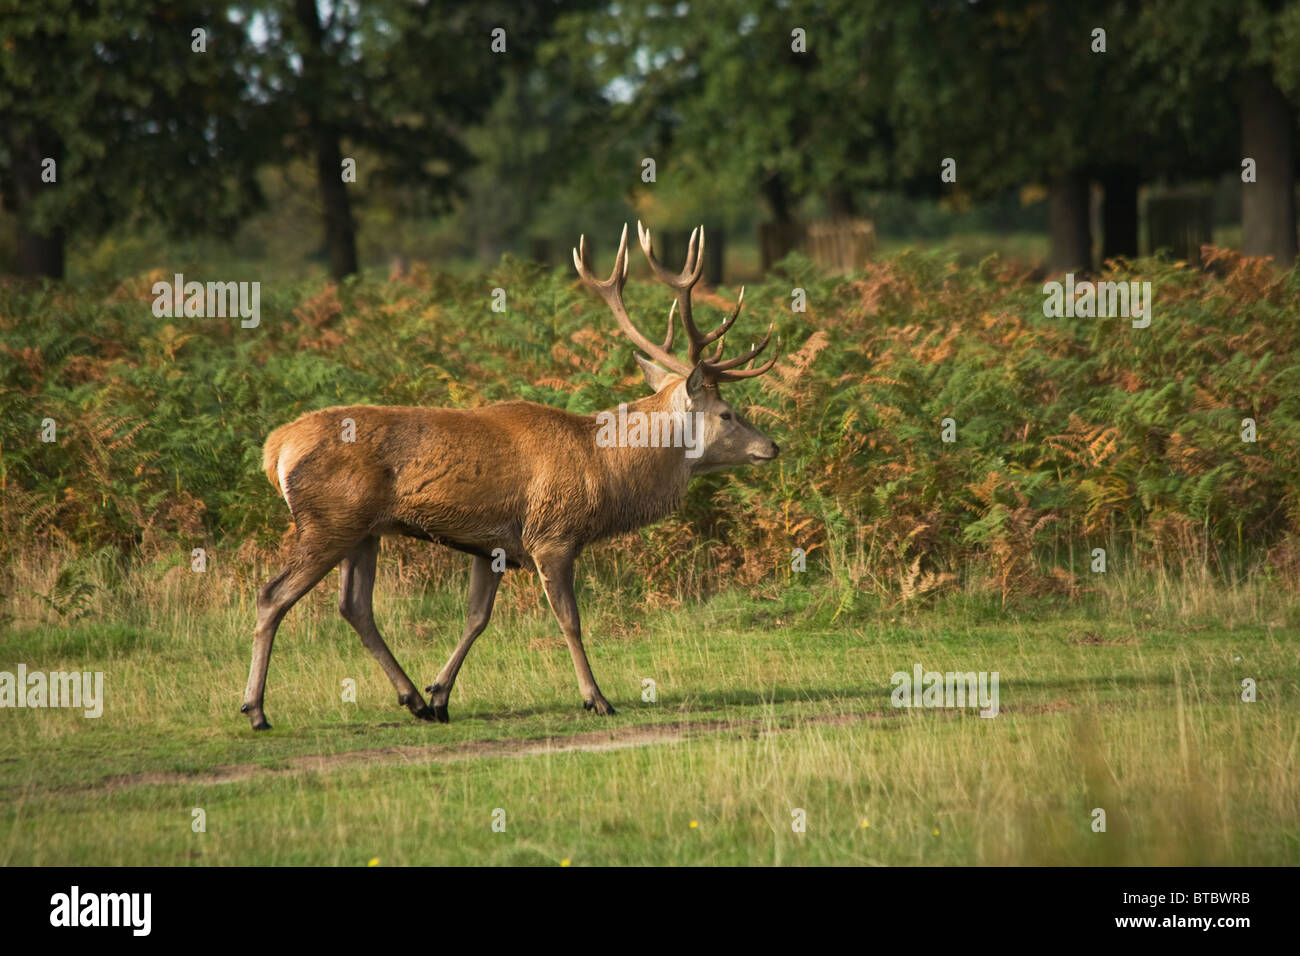 Red Deer Stag in Bushy Park during the Rutting Season Stock Photo